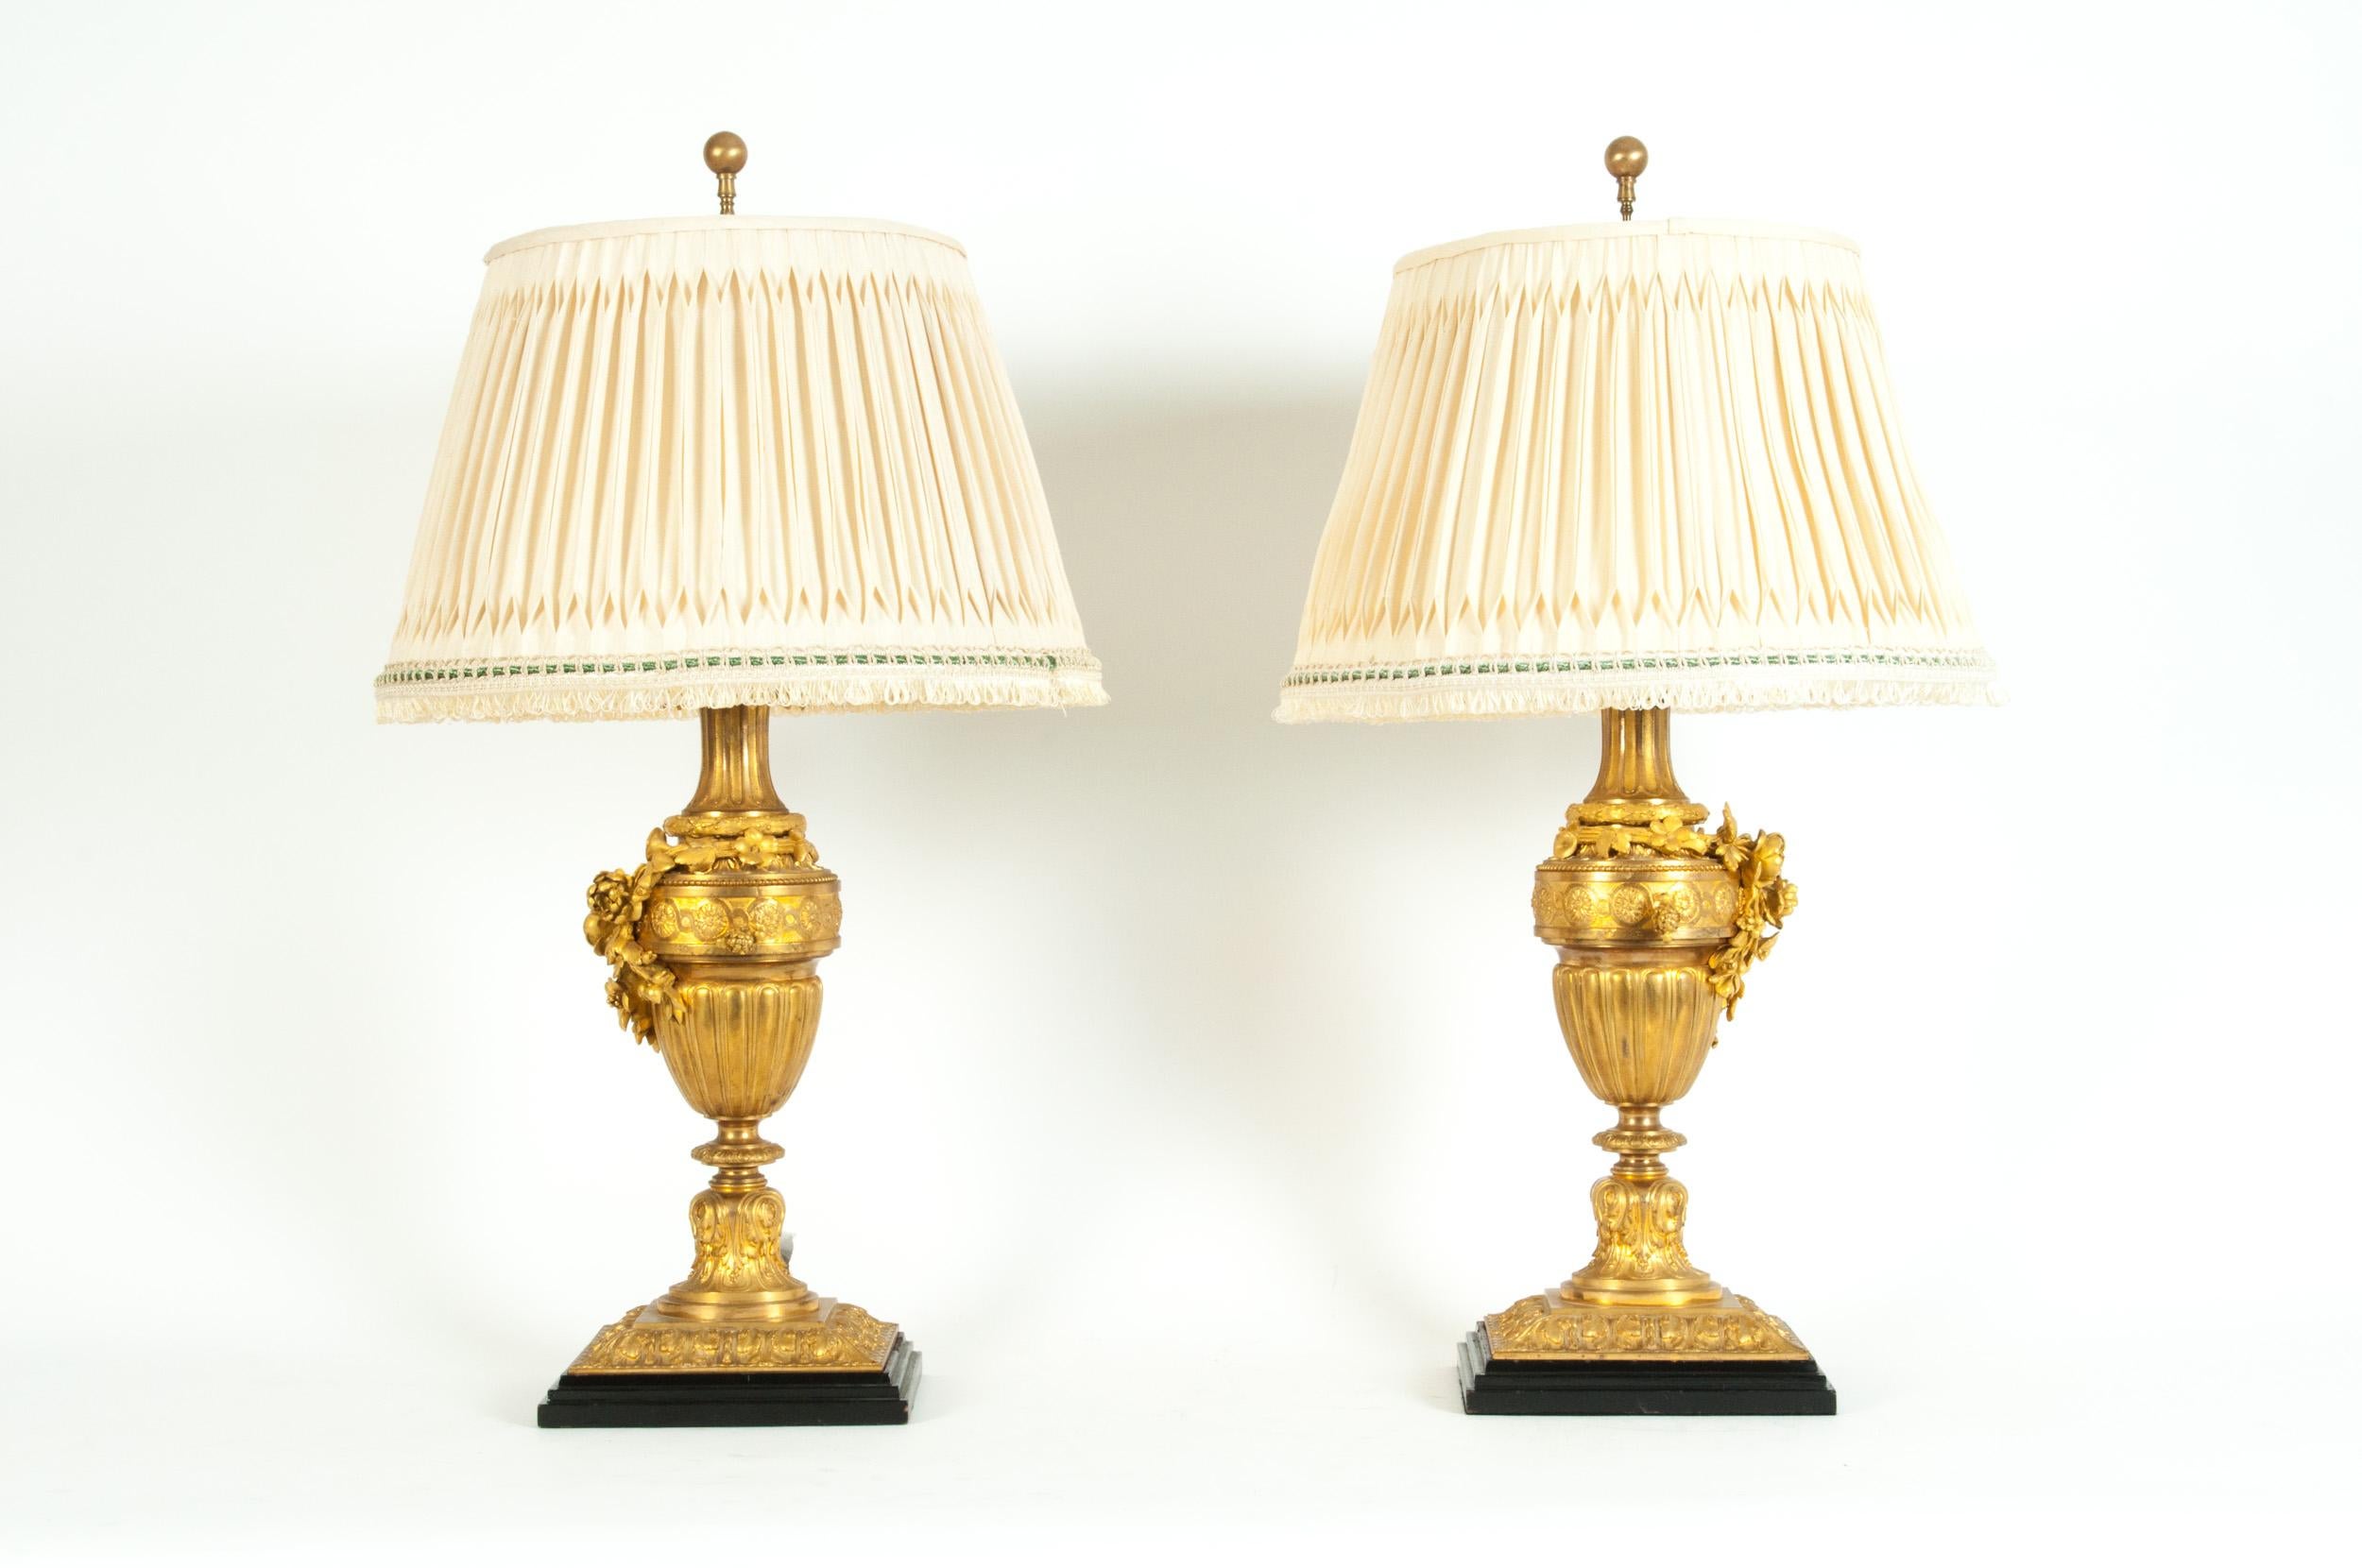 A pair of Louis XVI style gilt bronze task / table lamps. Each lamp is in excellent antique working condition, rewired for US use. Each lamp comes with a round pleated silk shade measuring 11 inches long x 17 inches base diameter. Each lamp measure